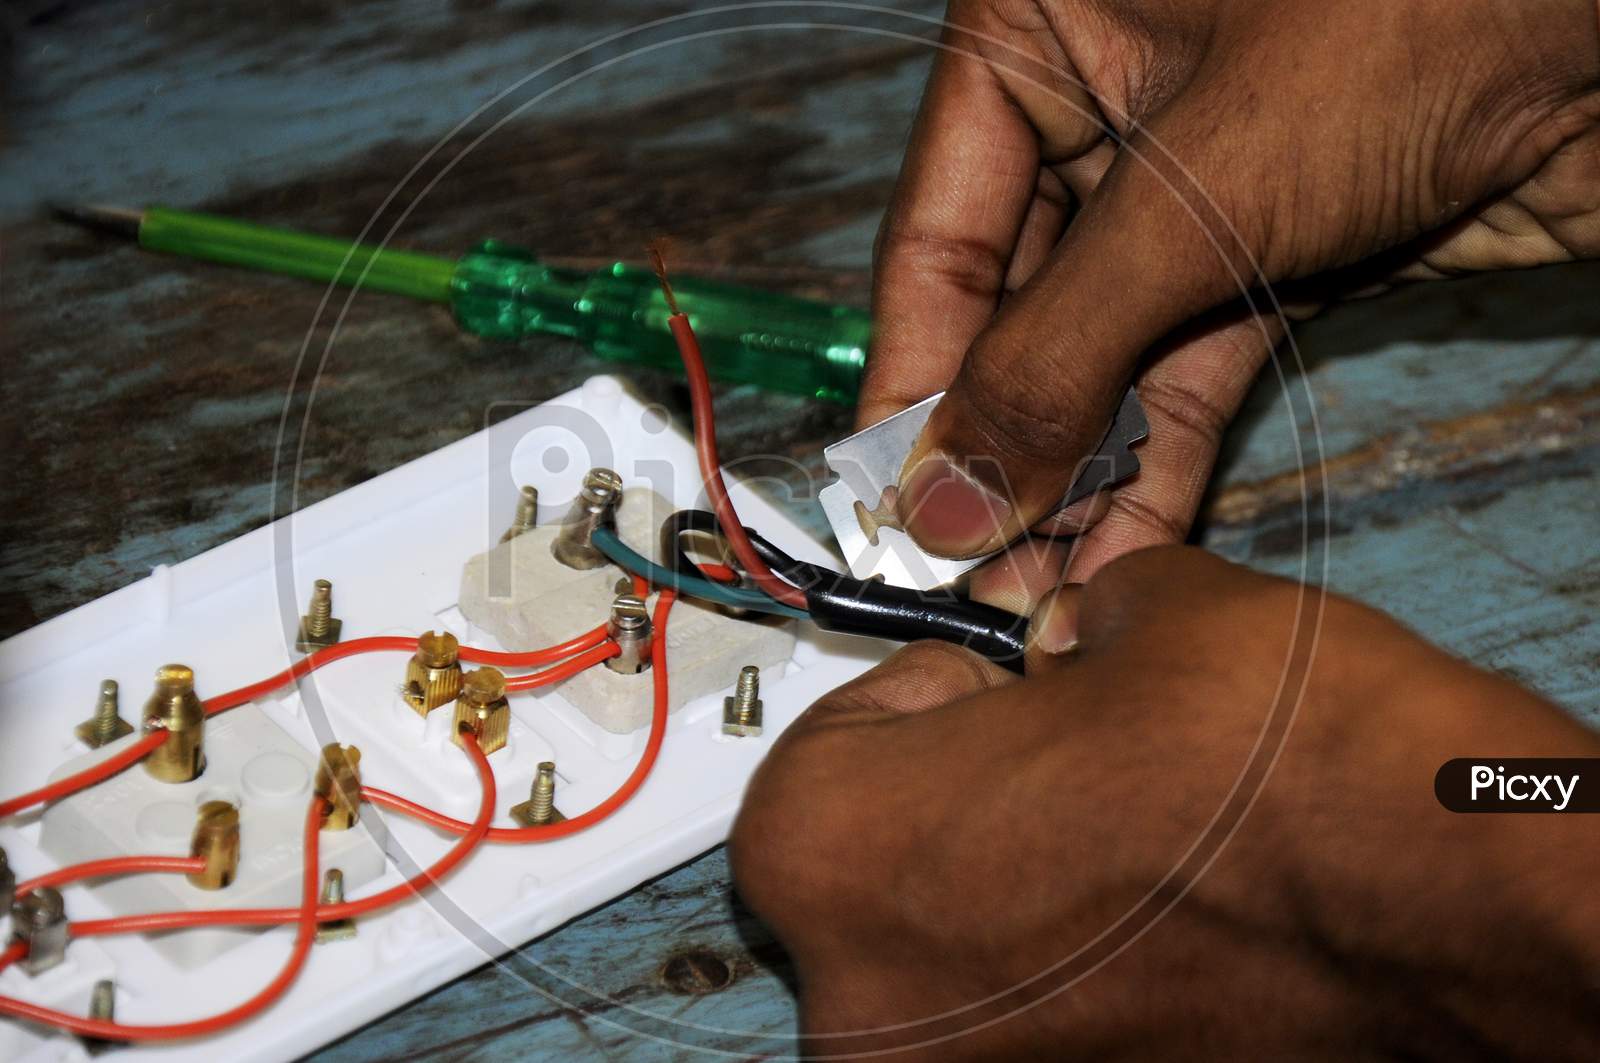 Electrician Working Safely On Switches And Sockets Of A Residential Electrical System, Electrical Equipment